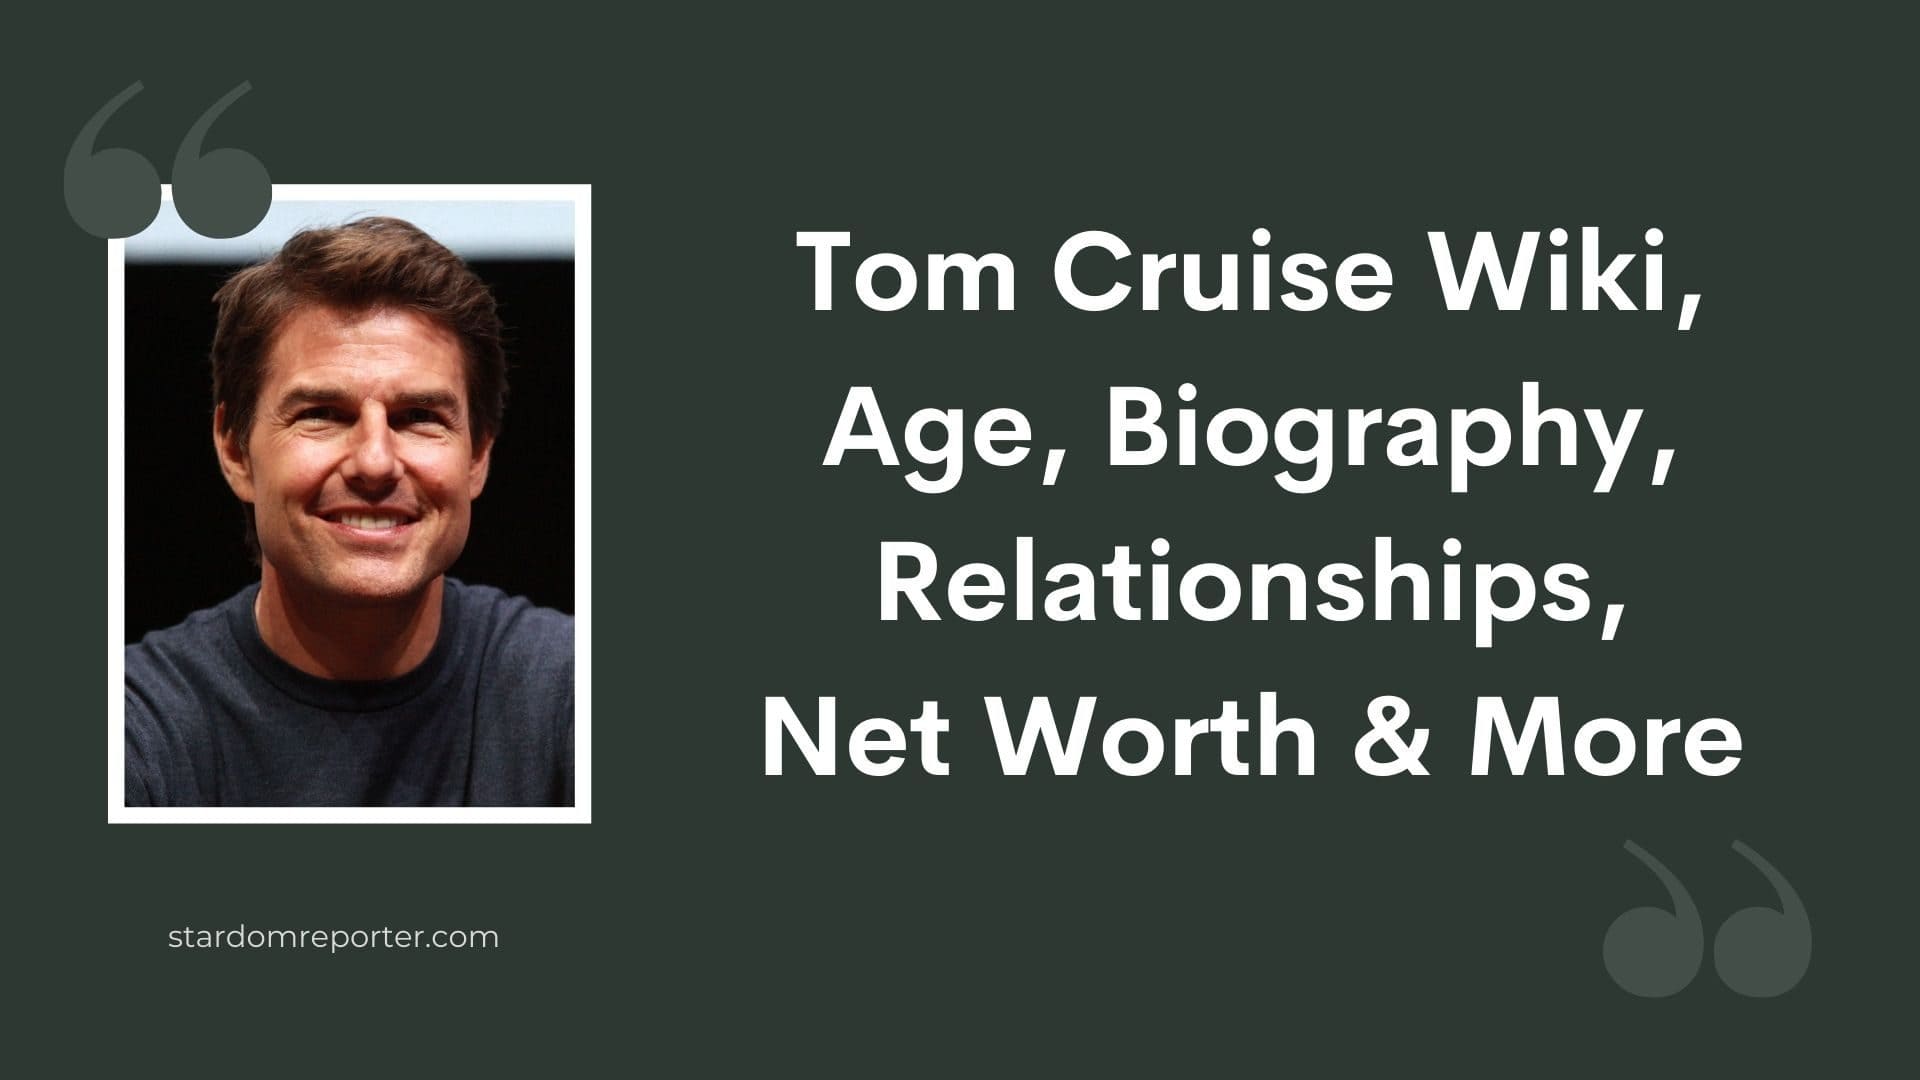 Tom Cruise Wiki, Age, Biography, Relationships, Net Worth & More - 31